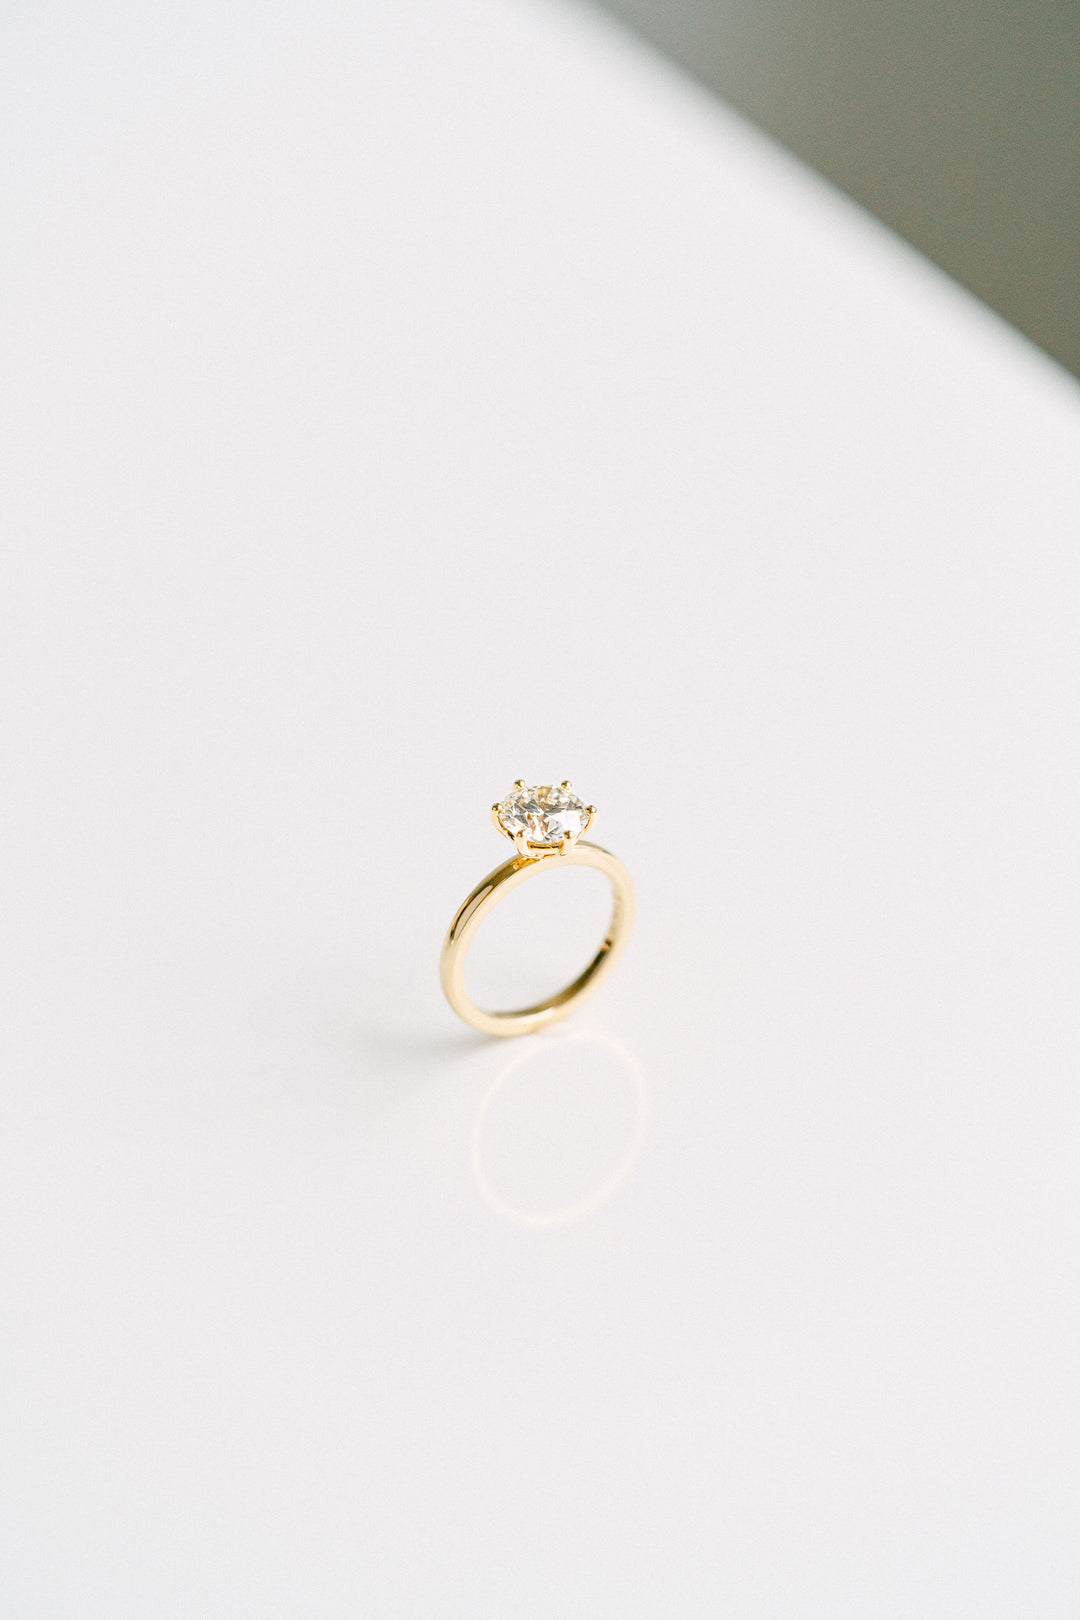 Round Brilliant Diamond Solitaire Engagement Ring With A 6-Prong Detail, 14k Yellow Gold